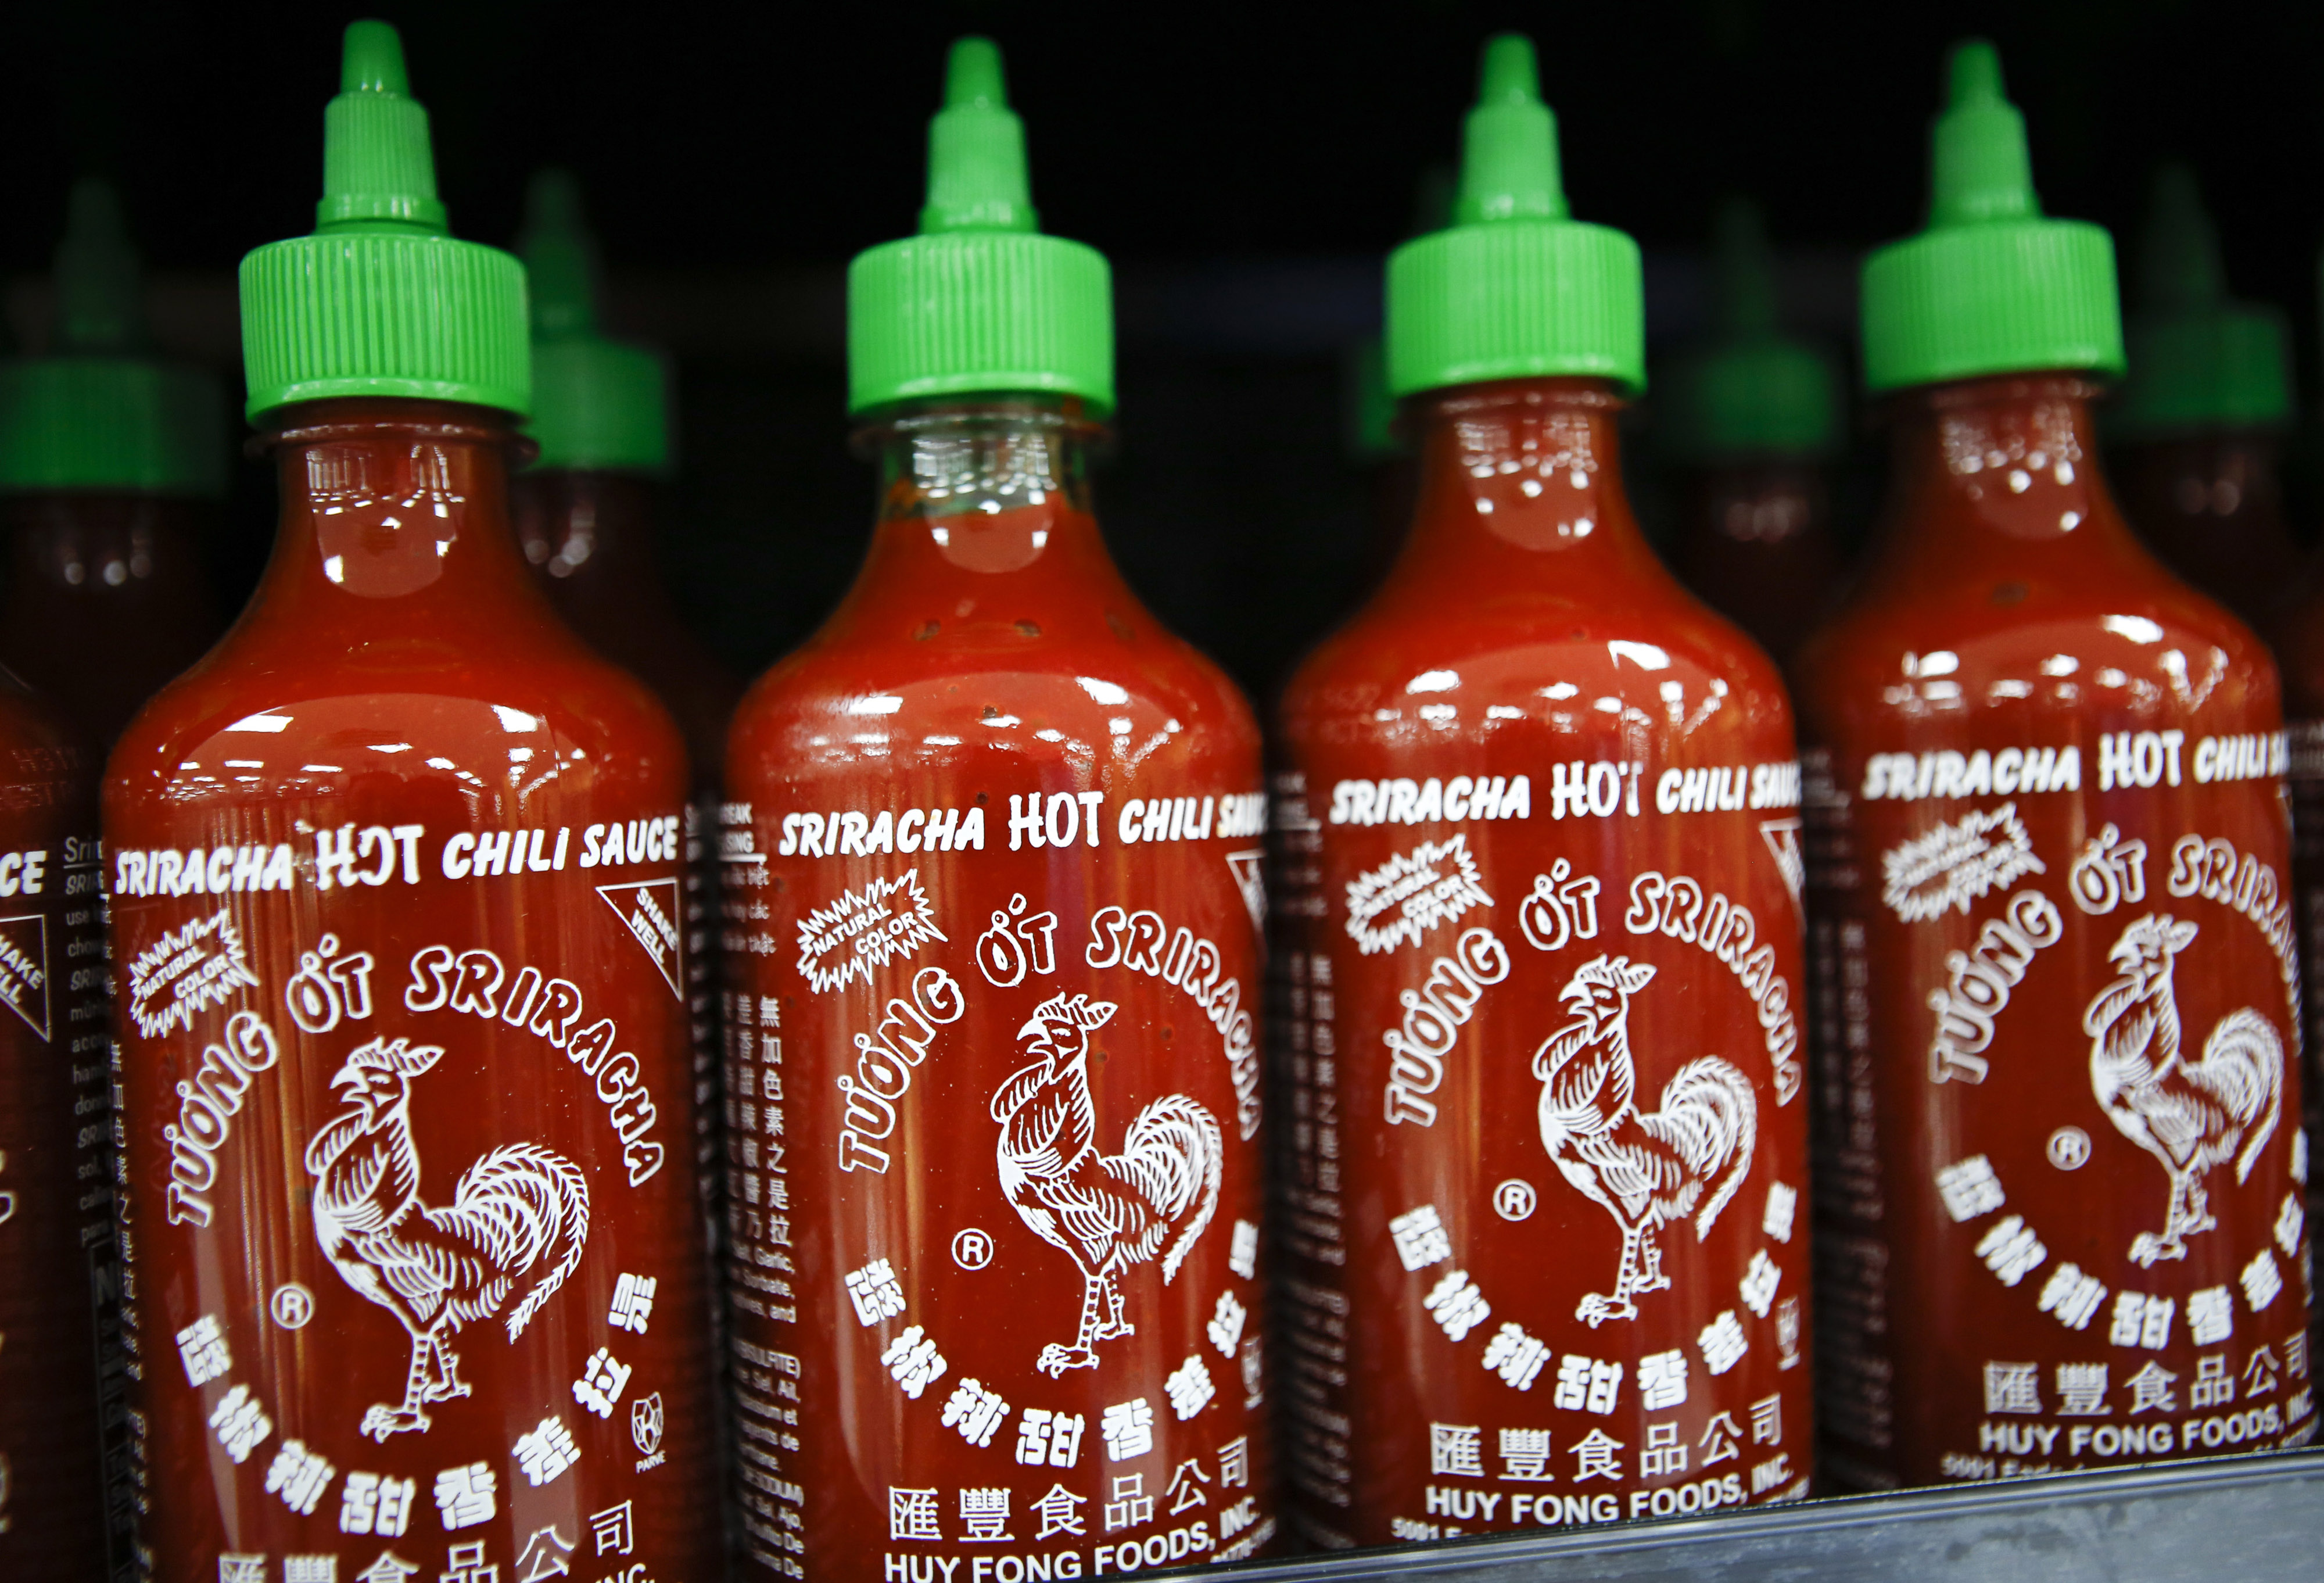 Sriracha sauce from Huy Fong Foods at a Wal-Mart in the Chinatown neighborhood of Los Angeles, on Sept. 19, 2013. (Patrick T. Fallon / Bloomberg / Getty Images)